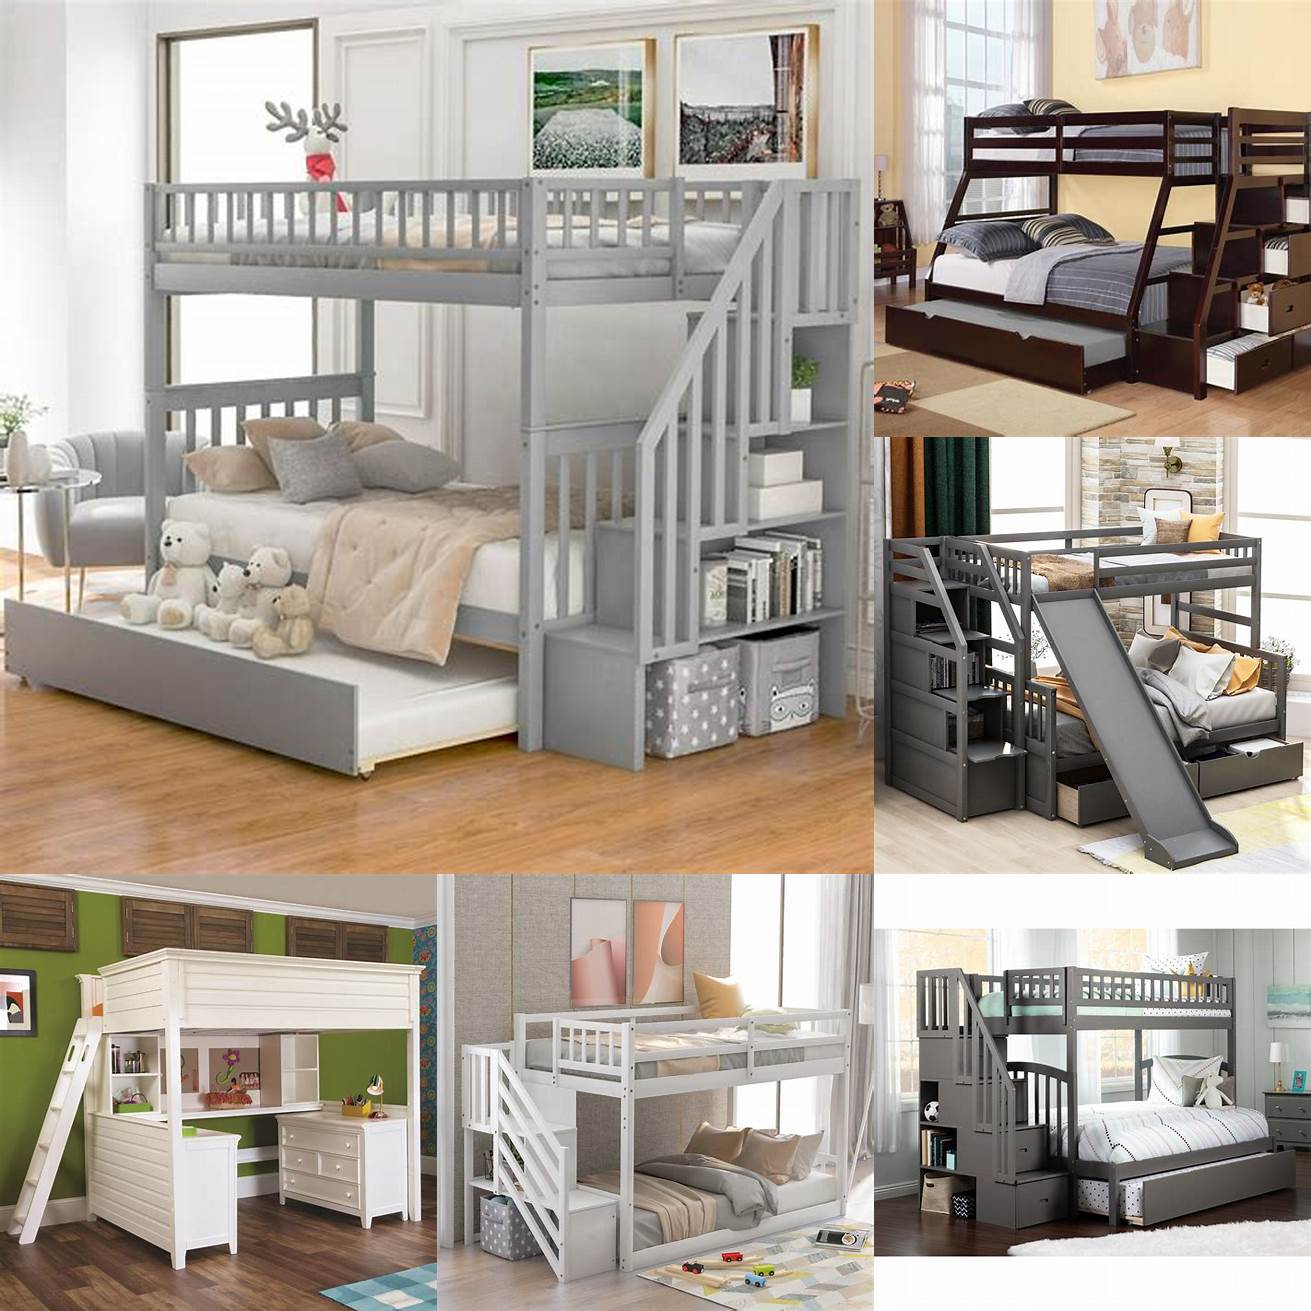 Modern bunk beds with storage